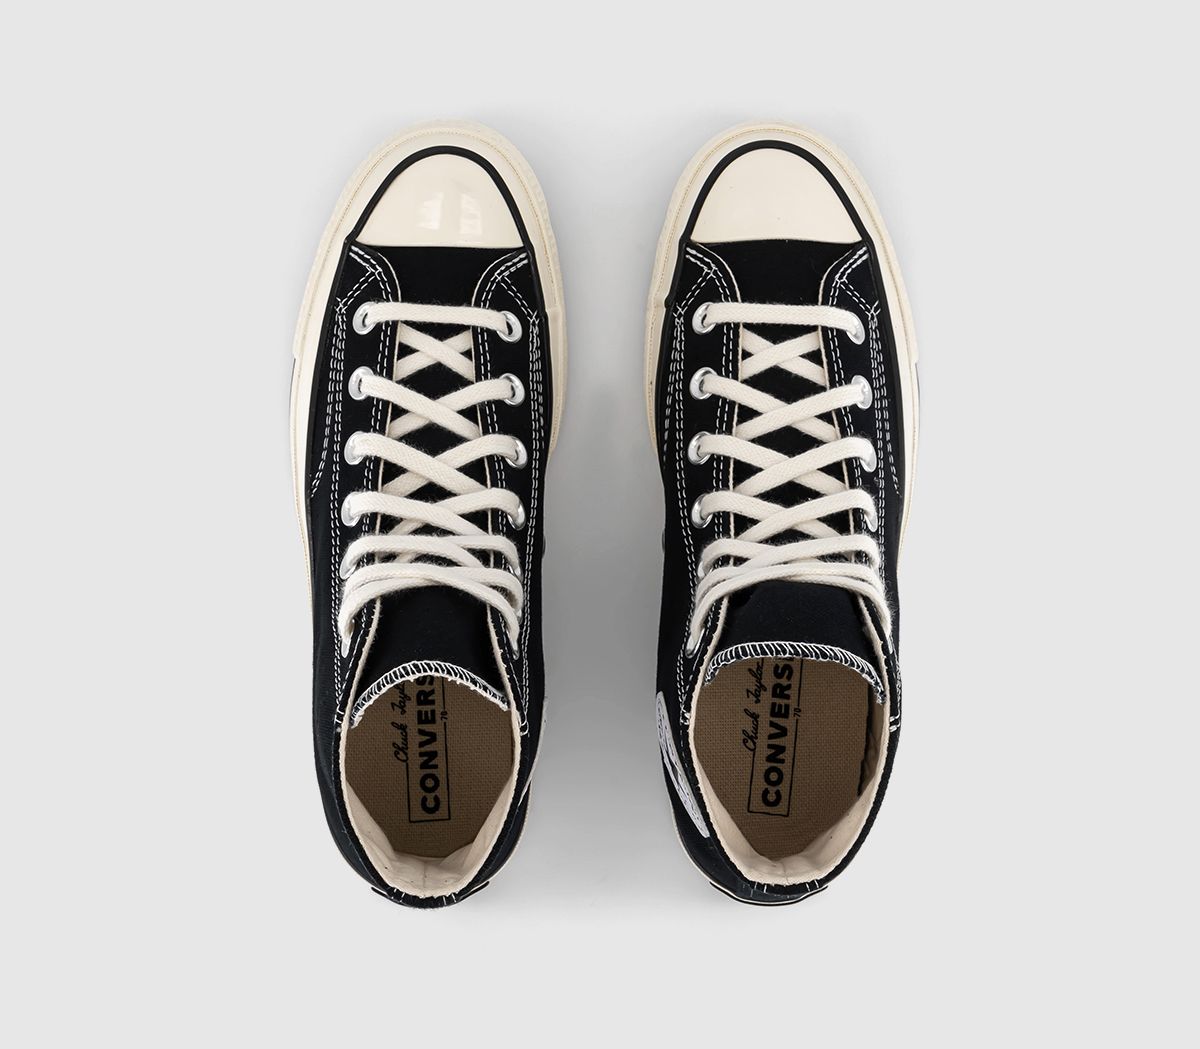 Converse All Star Hi 70s Trainers Black - His trainers